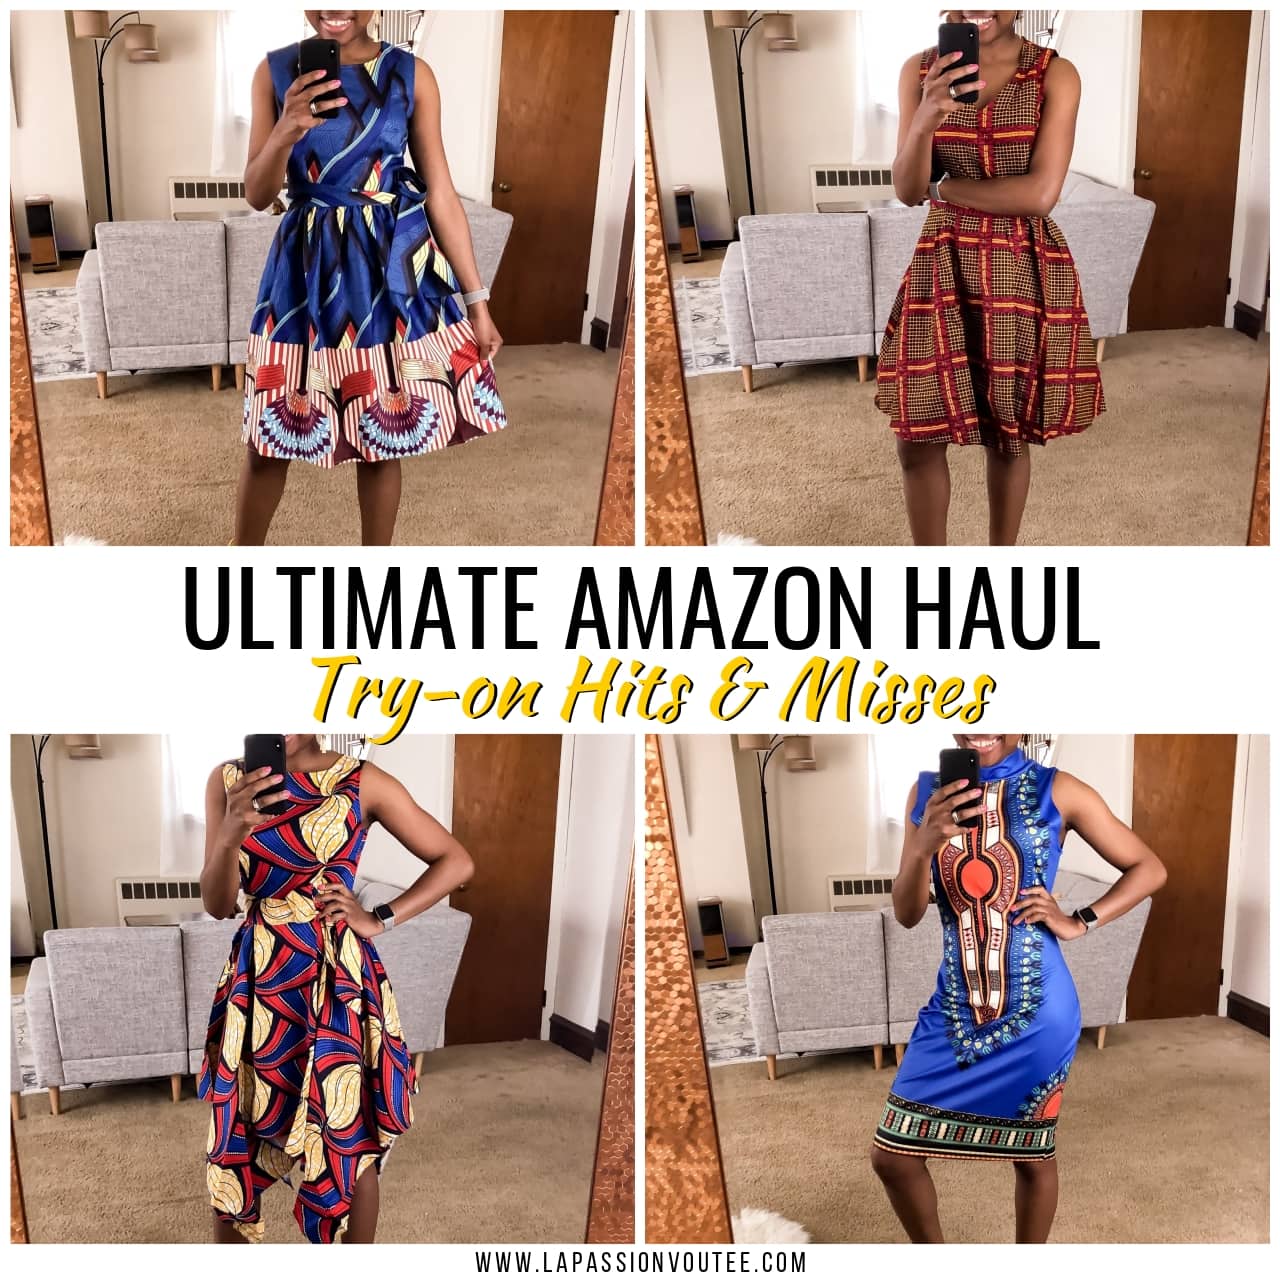 By popular request, here’s the epic Amazon haul of the best African wax print clothes available on Amazon. The the scoop on what to buy and what to skip plus my personal opinion about shopping for ankara clothes on Amazon. This post is about Amazon haul products, March Amazon haul, Amazon try-on, Amazon clothing, Amazon fashion haul, Amazon fashion, Amazon try-on, Amazon clothing